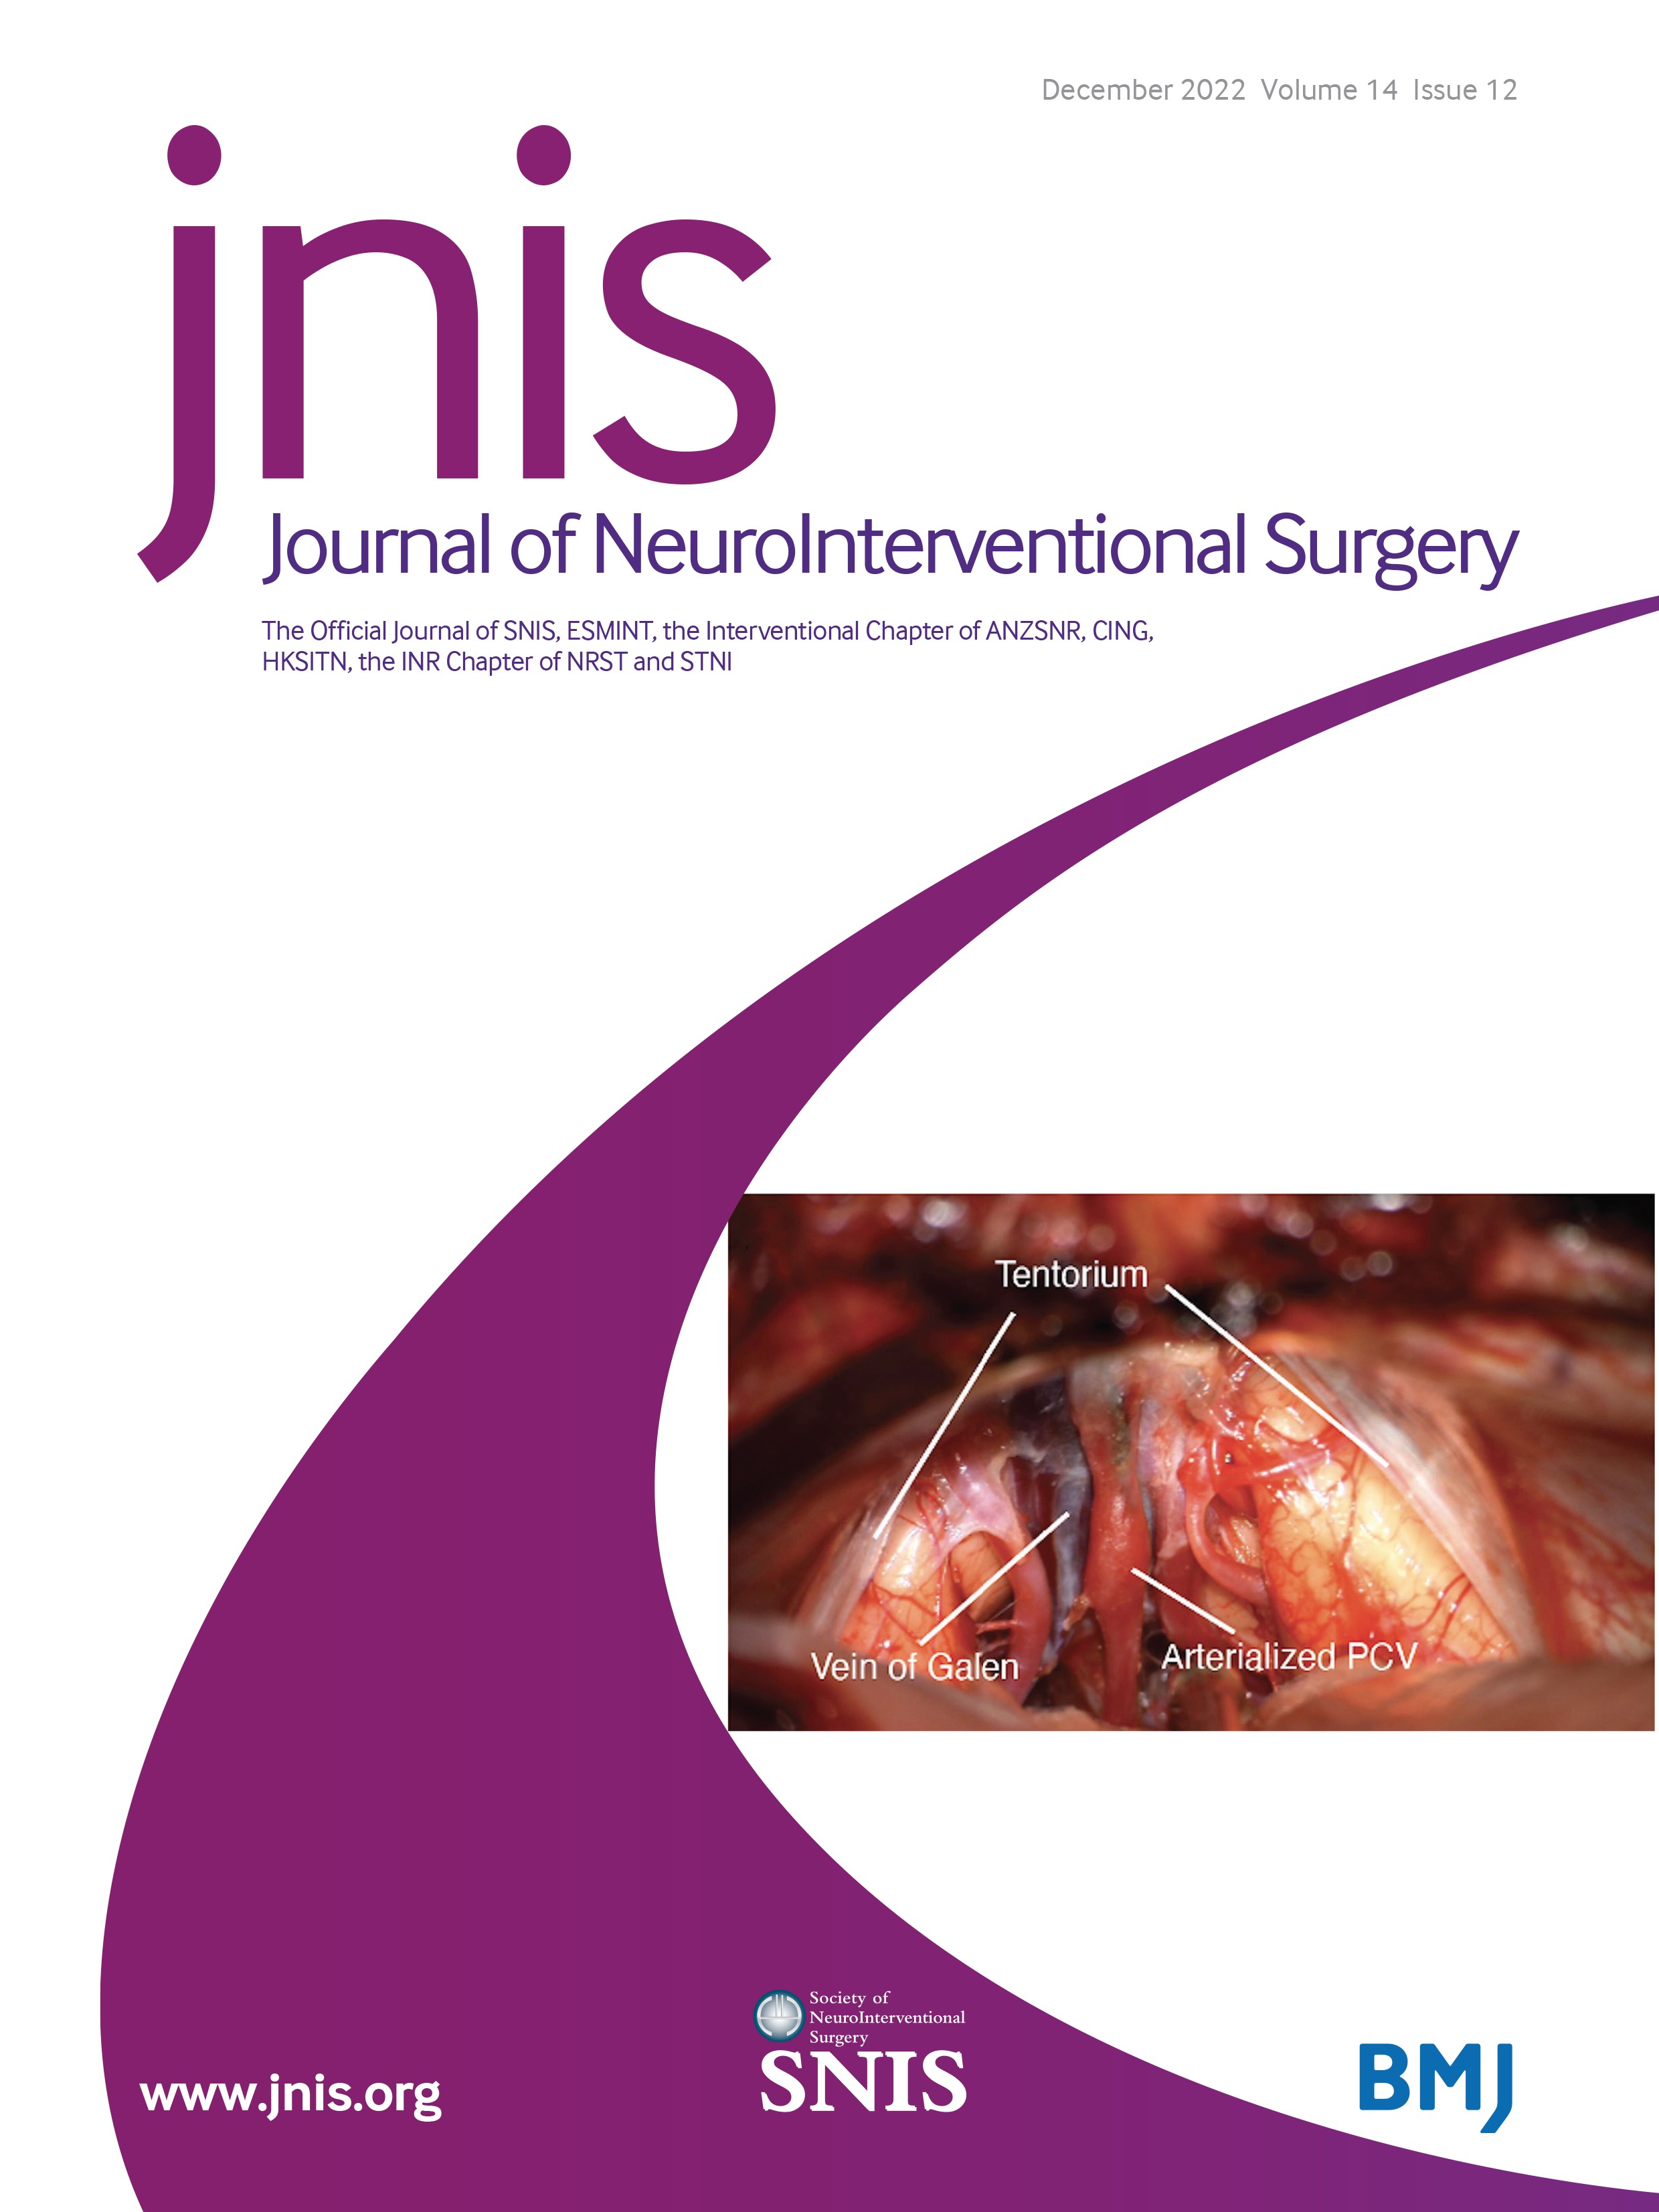 Comparison of embolization strategies for mixed plexiform and fistulous brain arteriovenous malformations: a computational model analysis of theoretical risks of nidus rupture